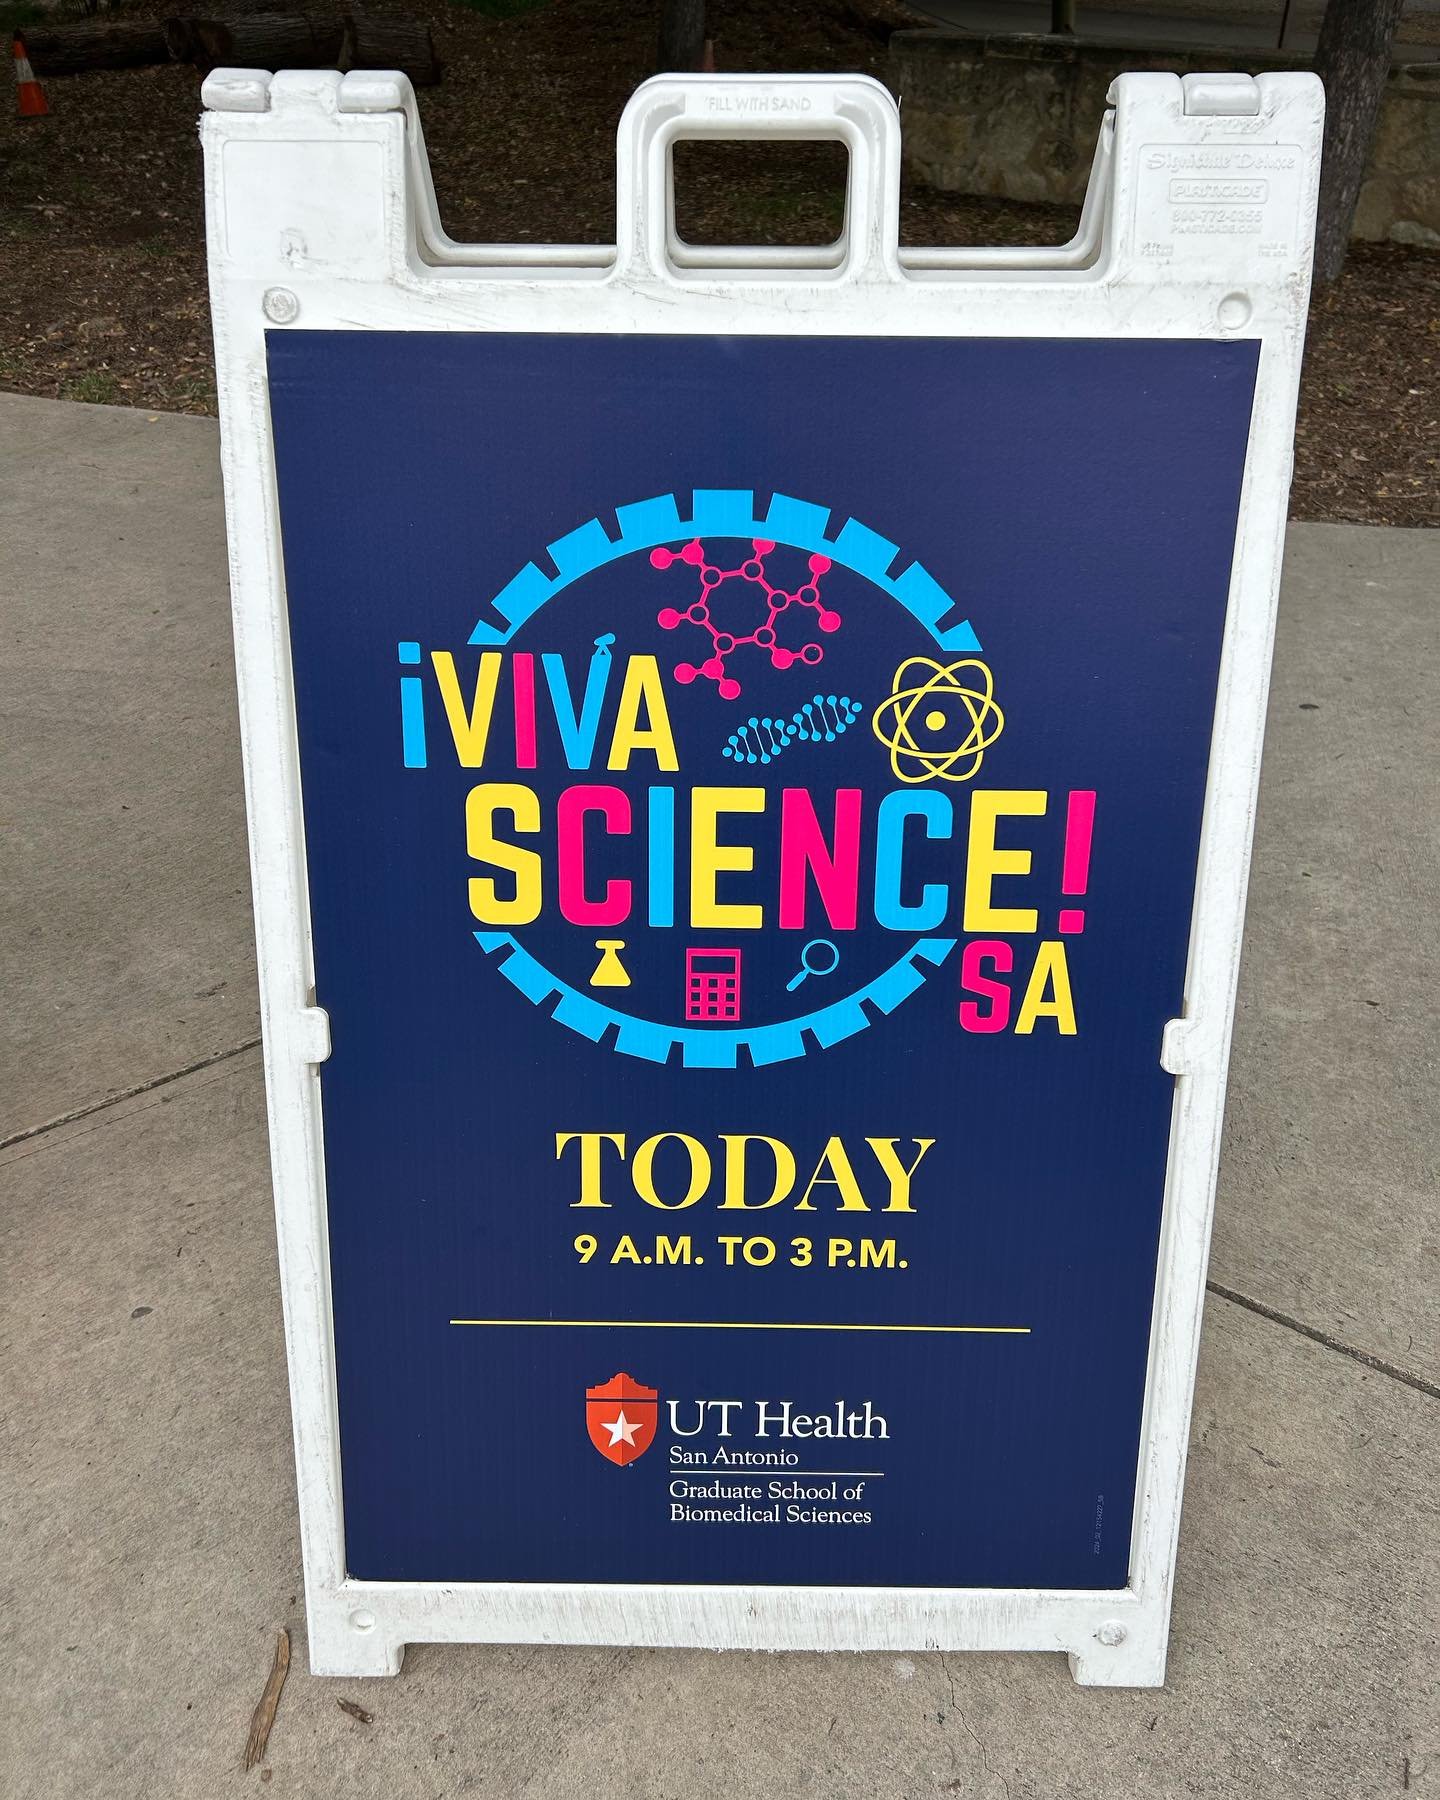 We had a great time @vivasciencesa celebrating science with strawberry DNA isolation, slime and thumb bacteria with a sprinkling of scorpions, spiders and horseshoe crabs! @asm_tamusa @tamusanantonio #asm #students #volunteers #stem - thanks to all t